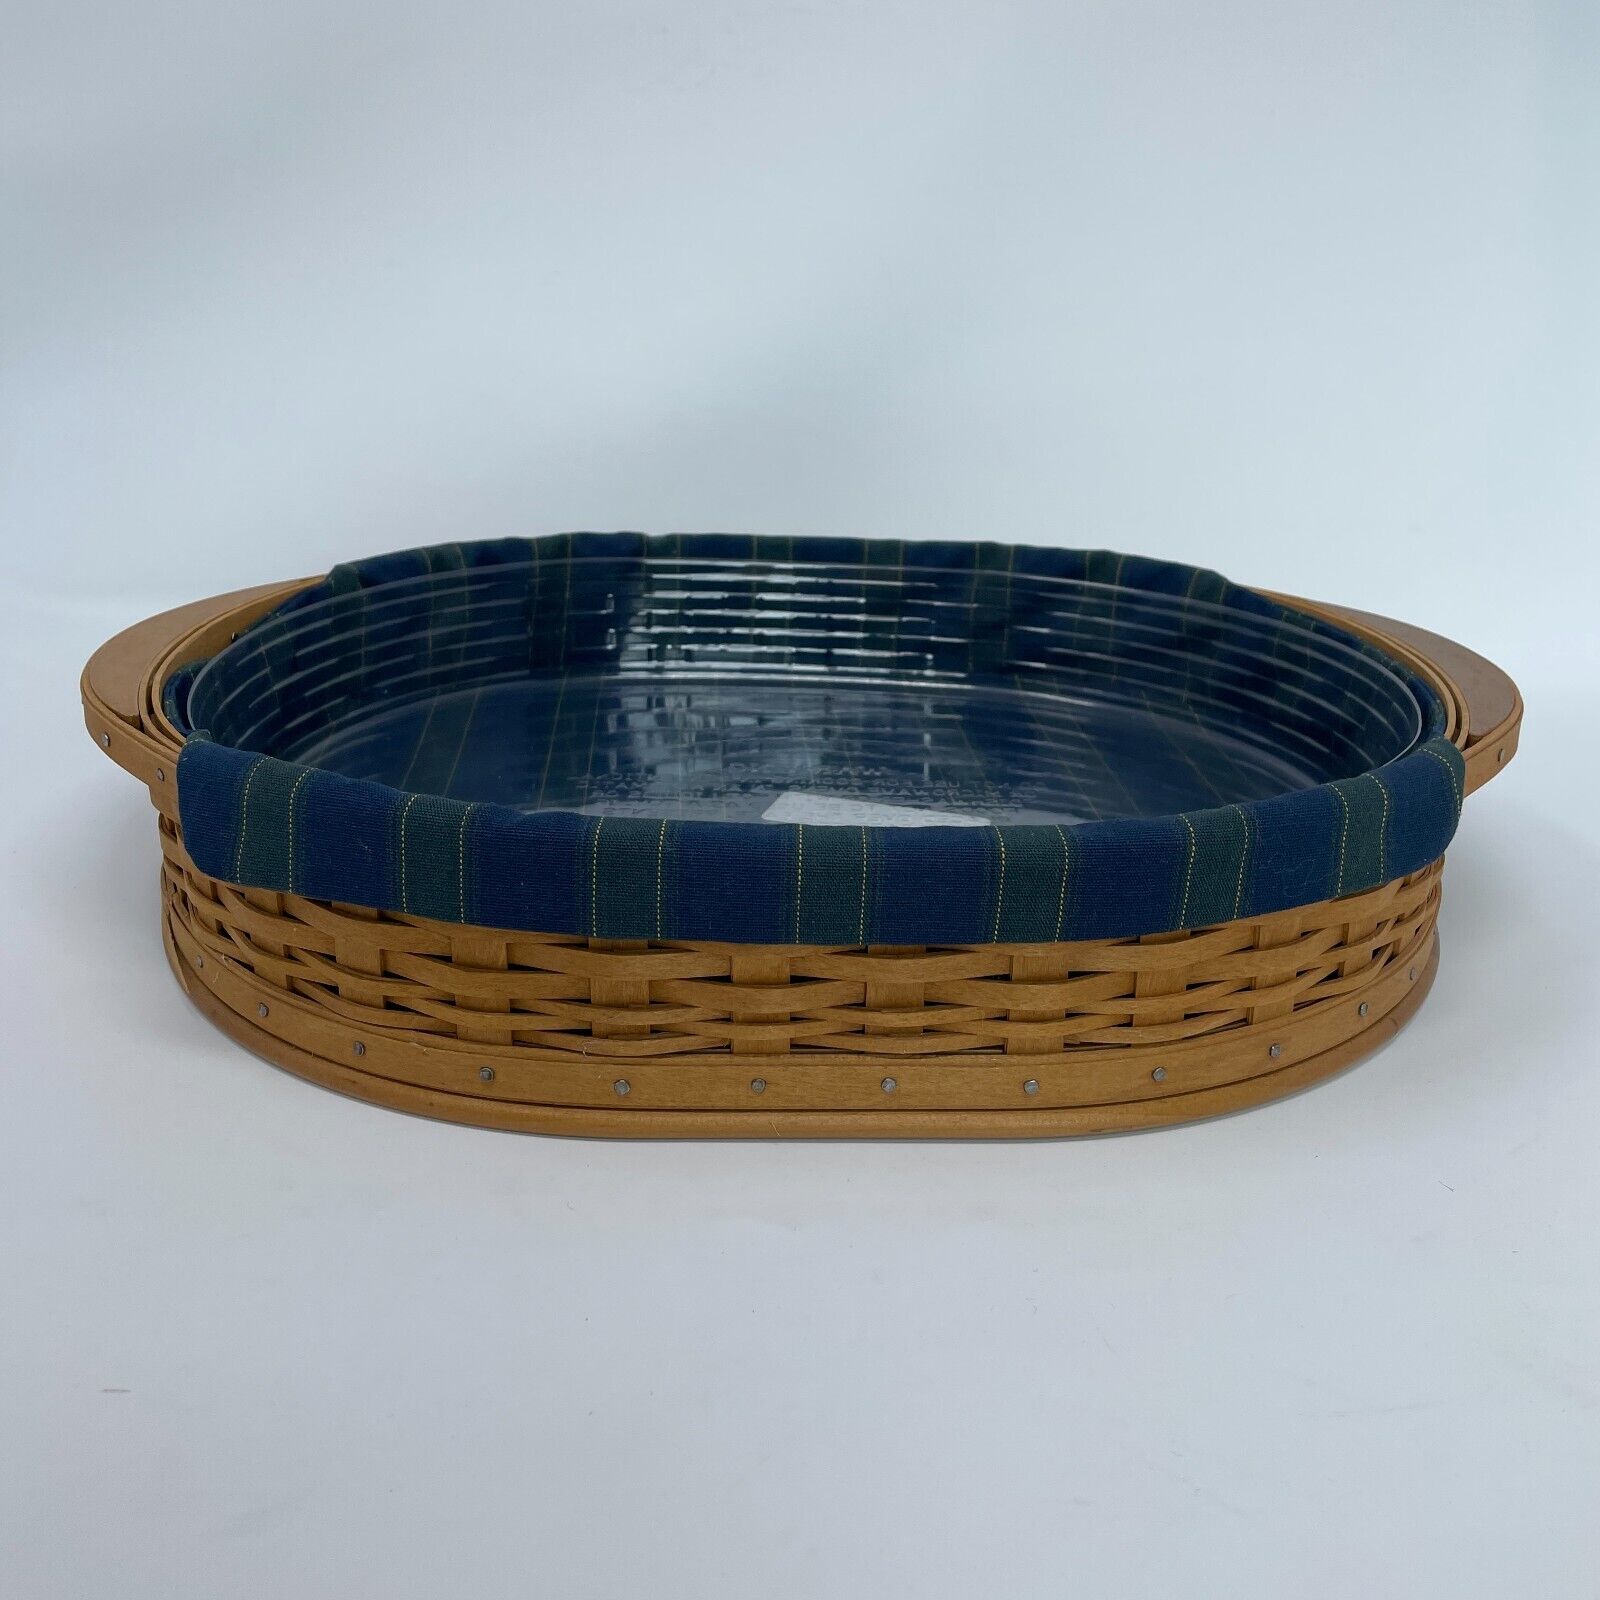 Longaberger 2004 Collectors Club Oval Tea Tray Basket Fabic Liner Protector Navy